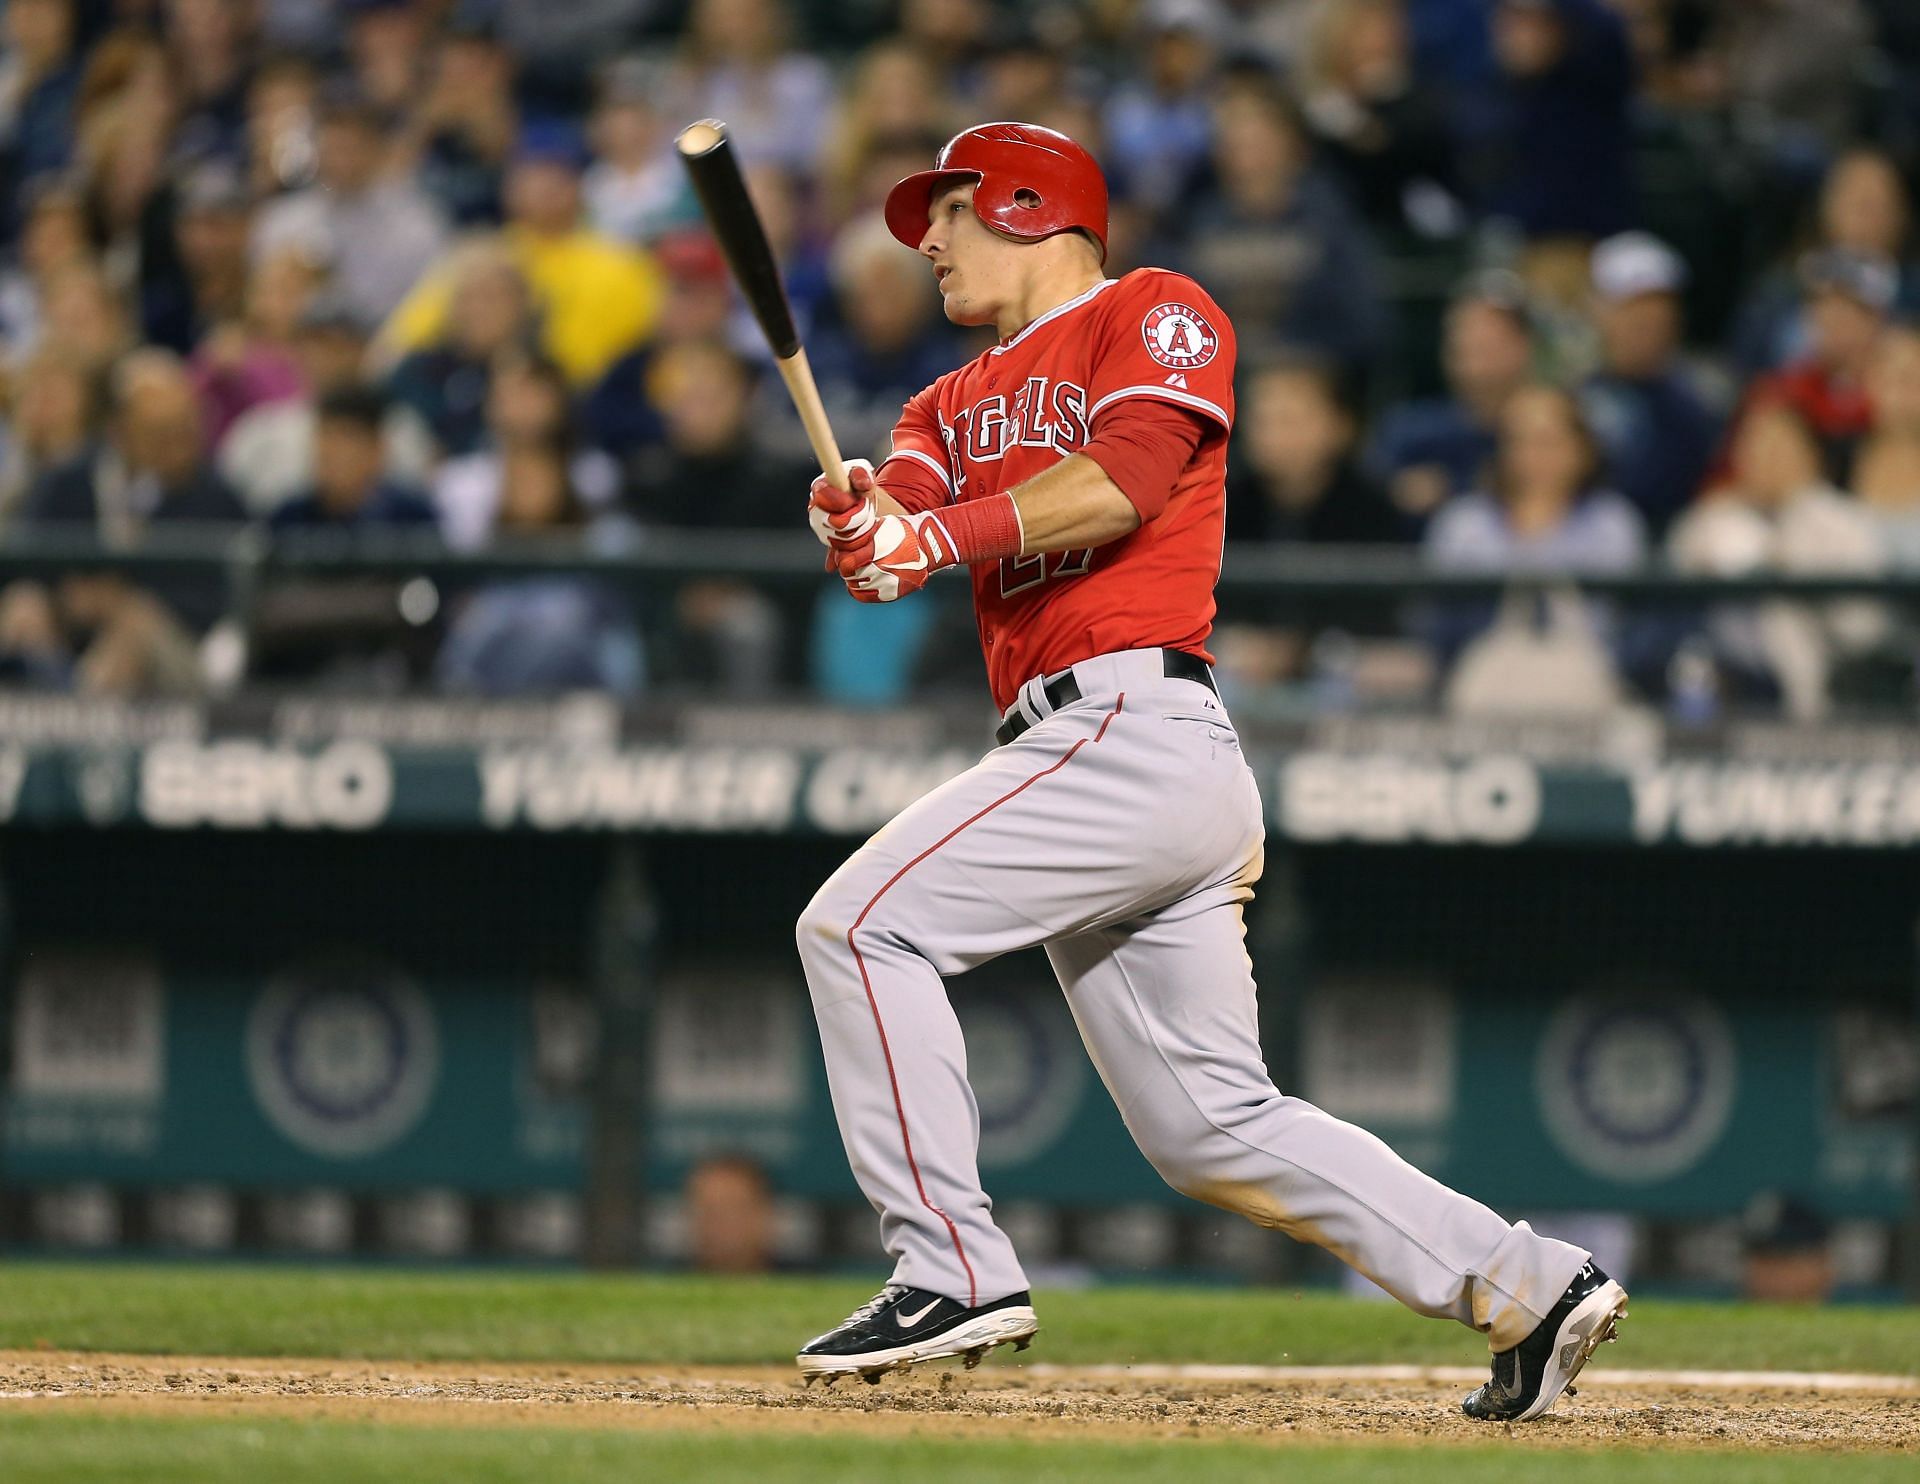 Mike Trout #27 of the Los Angeles Angels of Anaheim triples for his fourth hit of the game in the sixth inning against the Seattle Mariners at Safeco Field on October 1, 2012 in Seattle, Washington